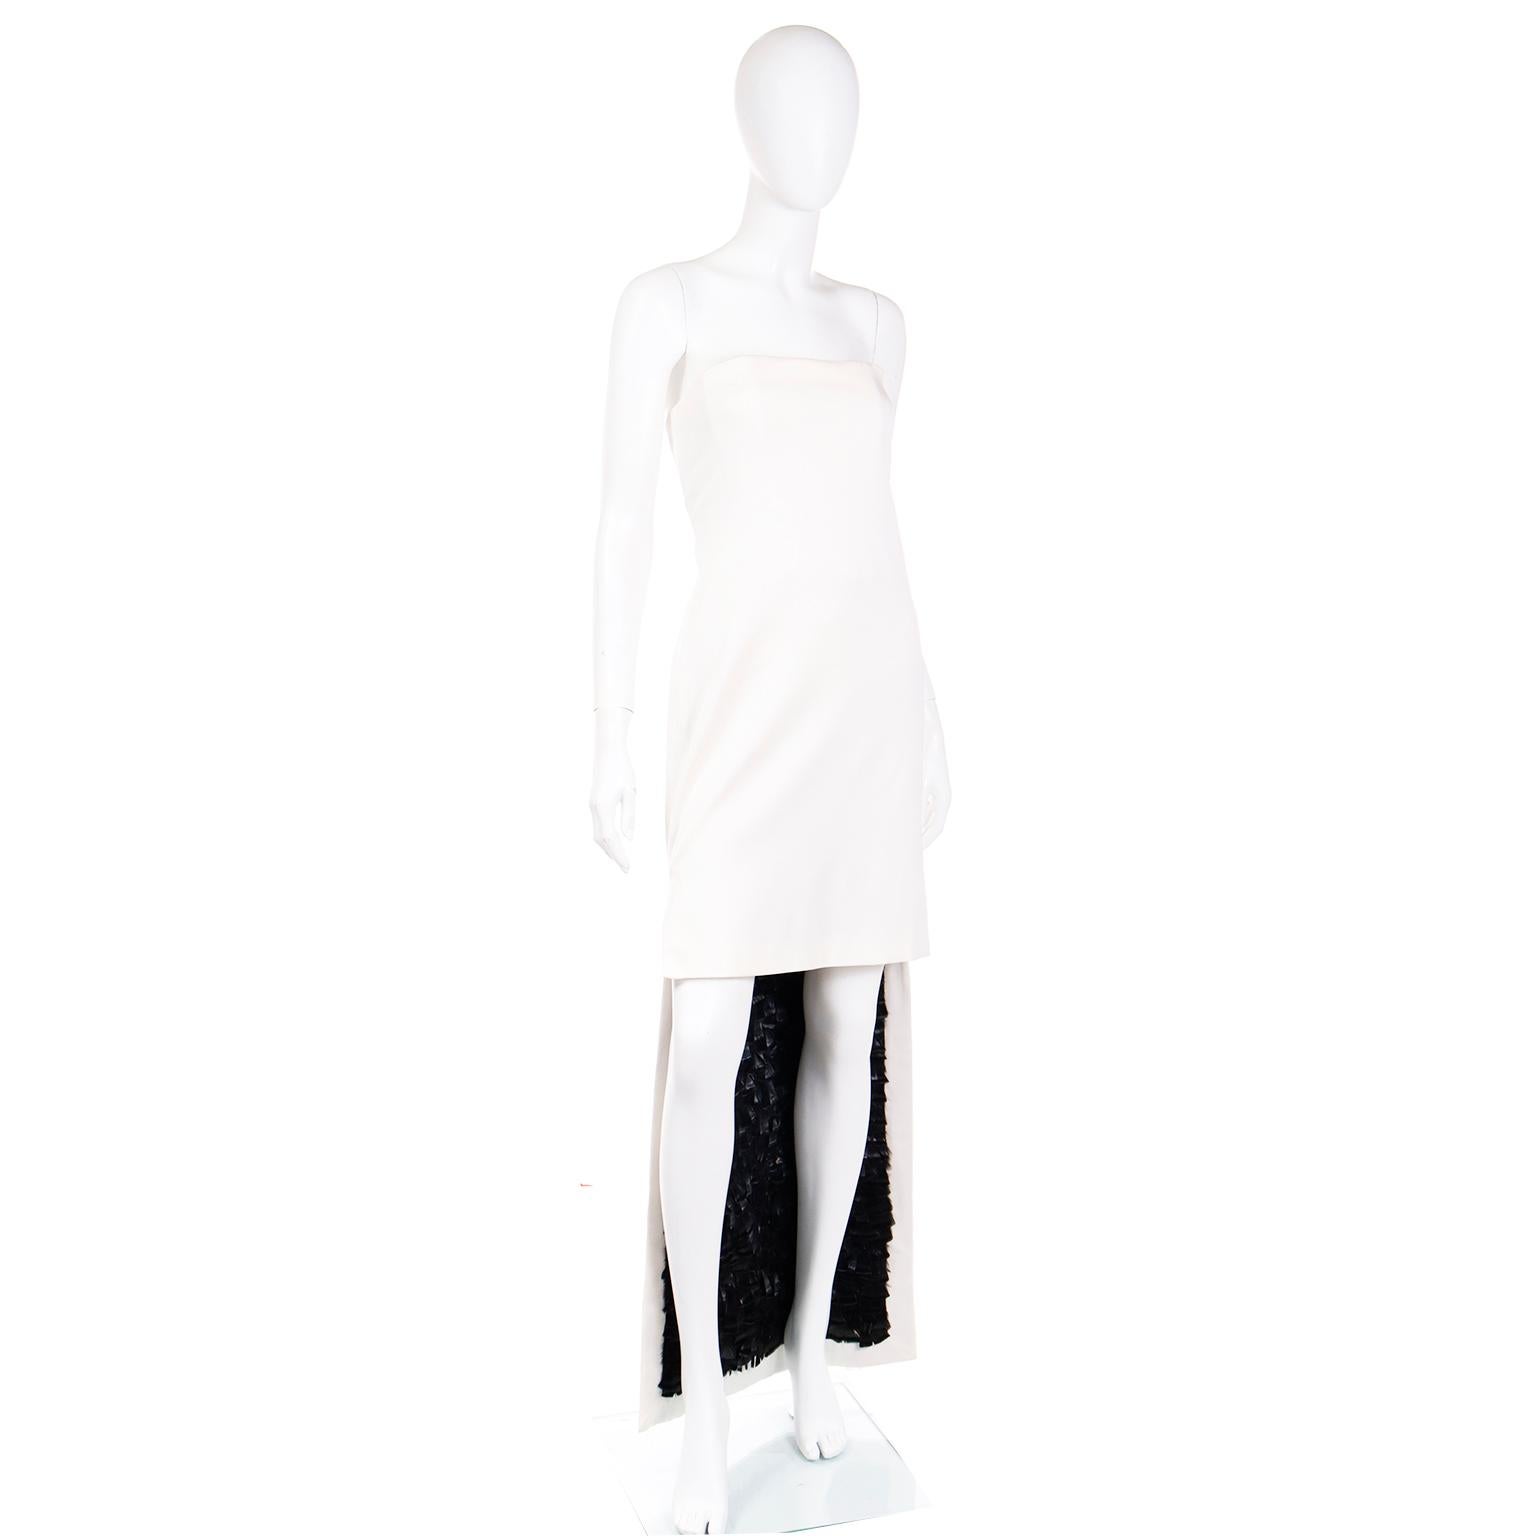 2001 Tom Ford for Yves Saint Laurent Strapless White Dress w Black Feather Train For Sale 3